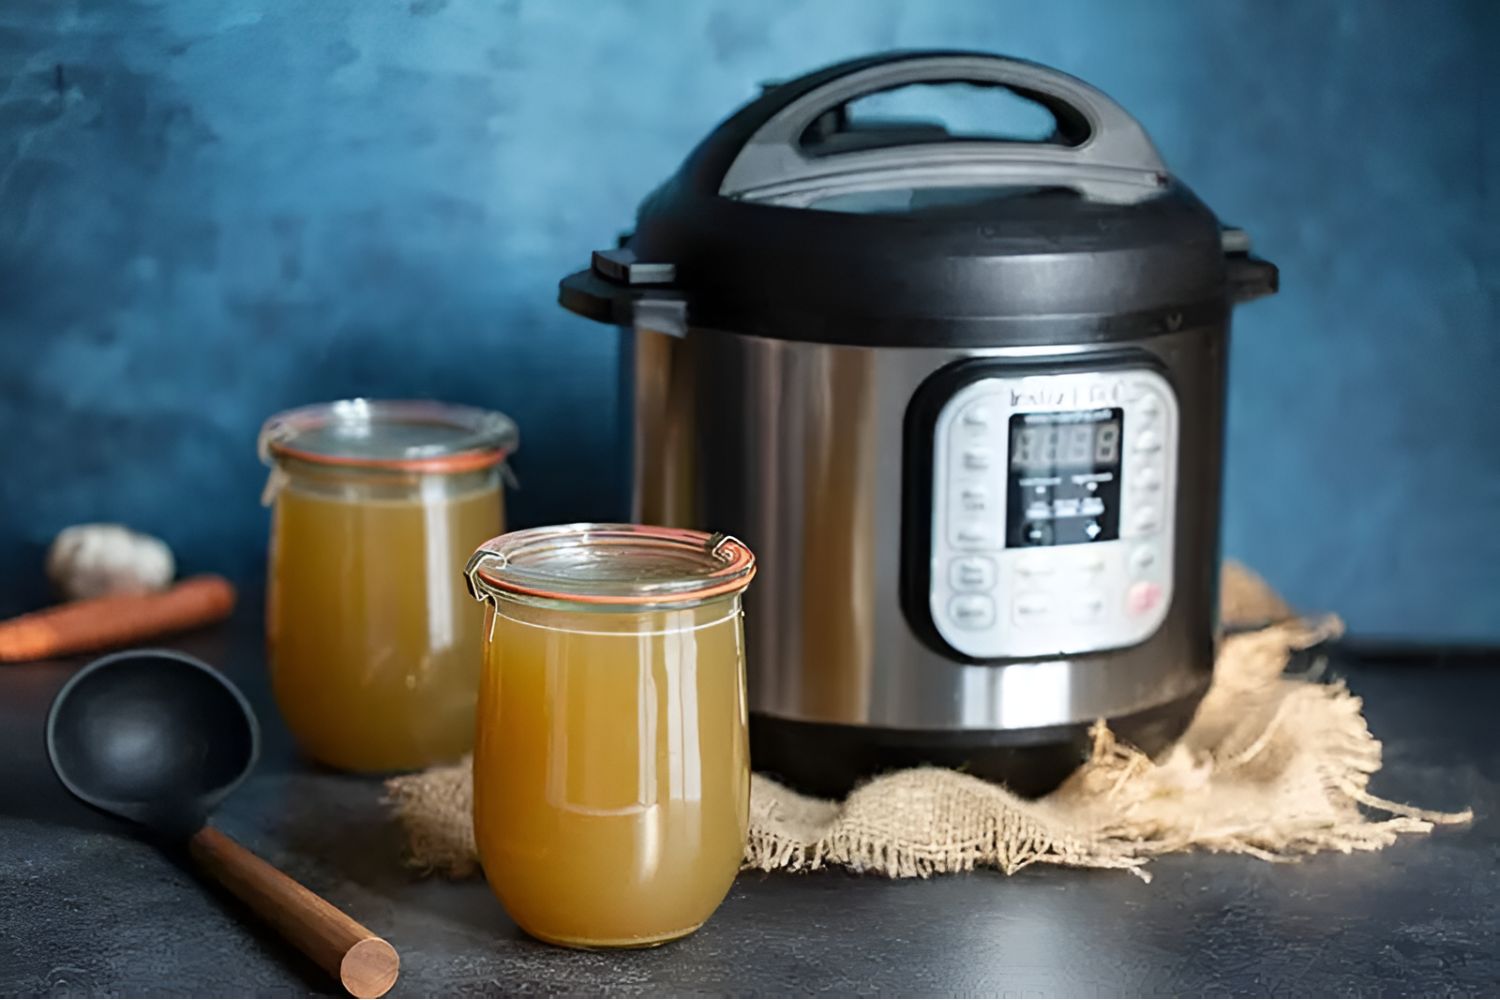 How To Make Chicken Broth In An Electric Pressure Cooker